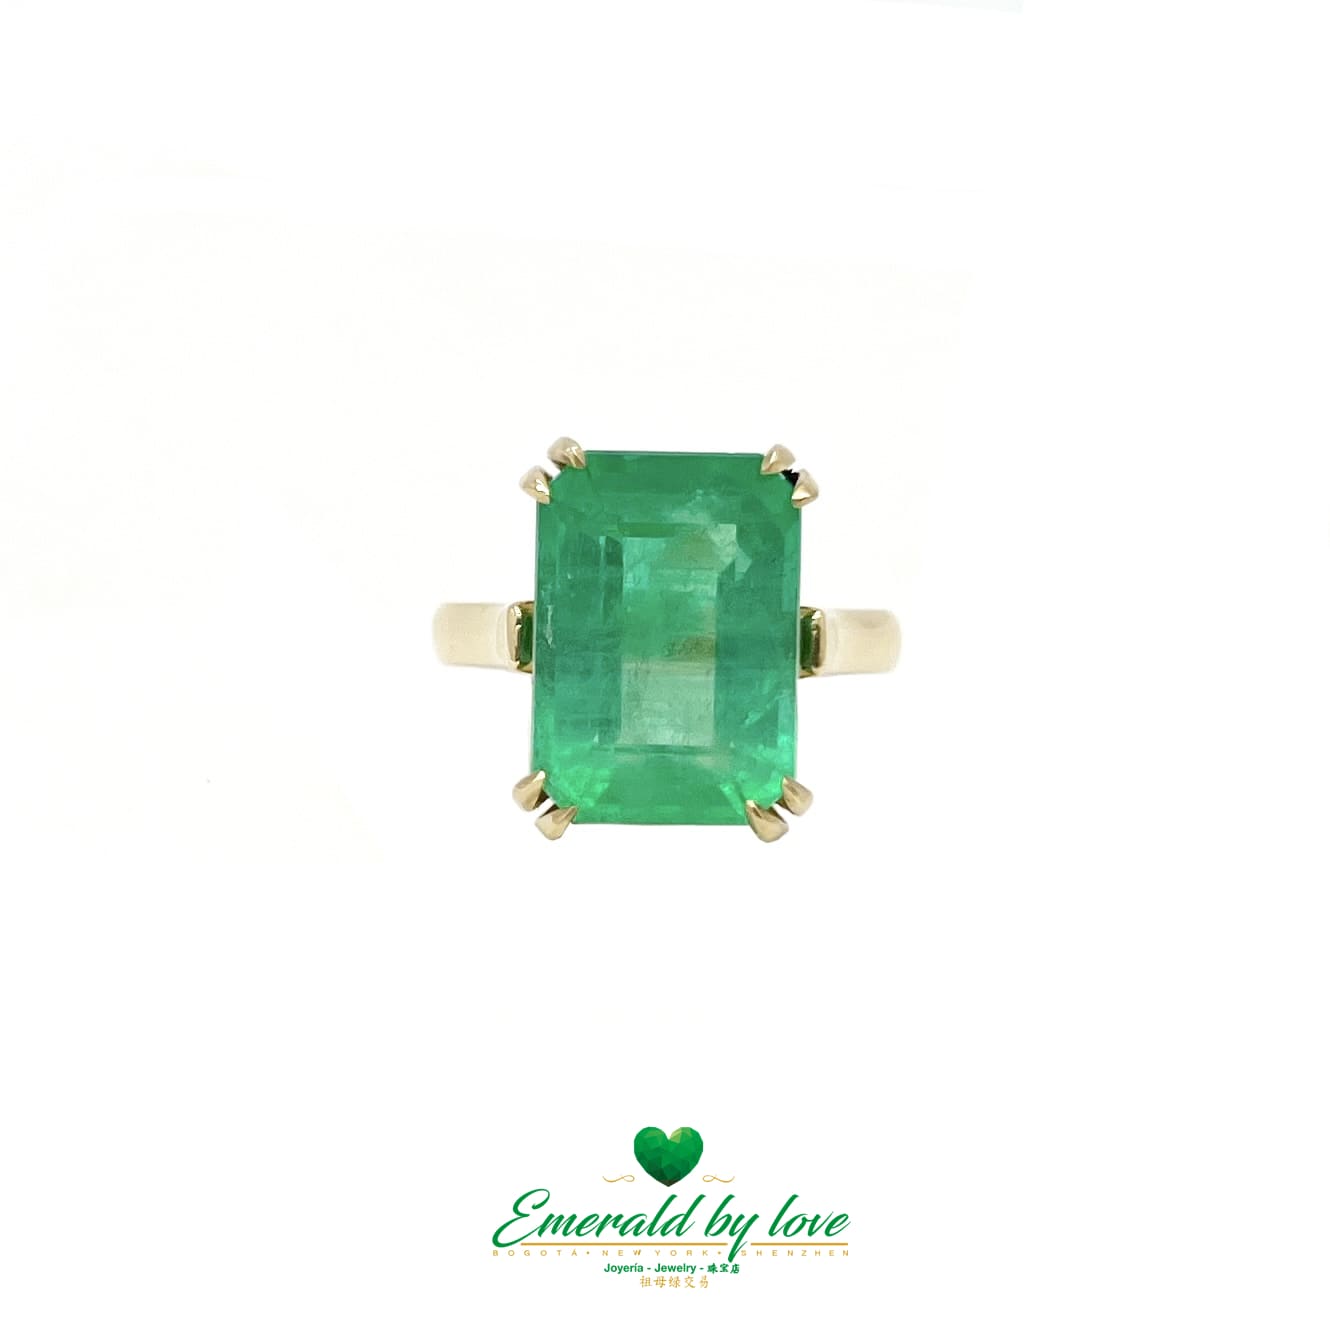 Magnificent Majesty: Yellow Gold Ring with Spectacular Emerald-Cut Emerald Centerpiece